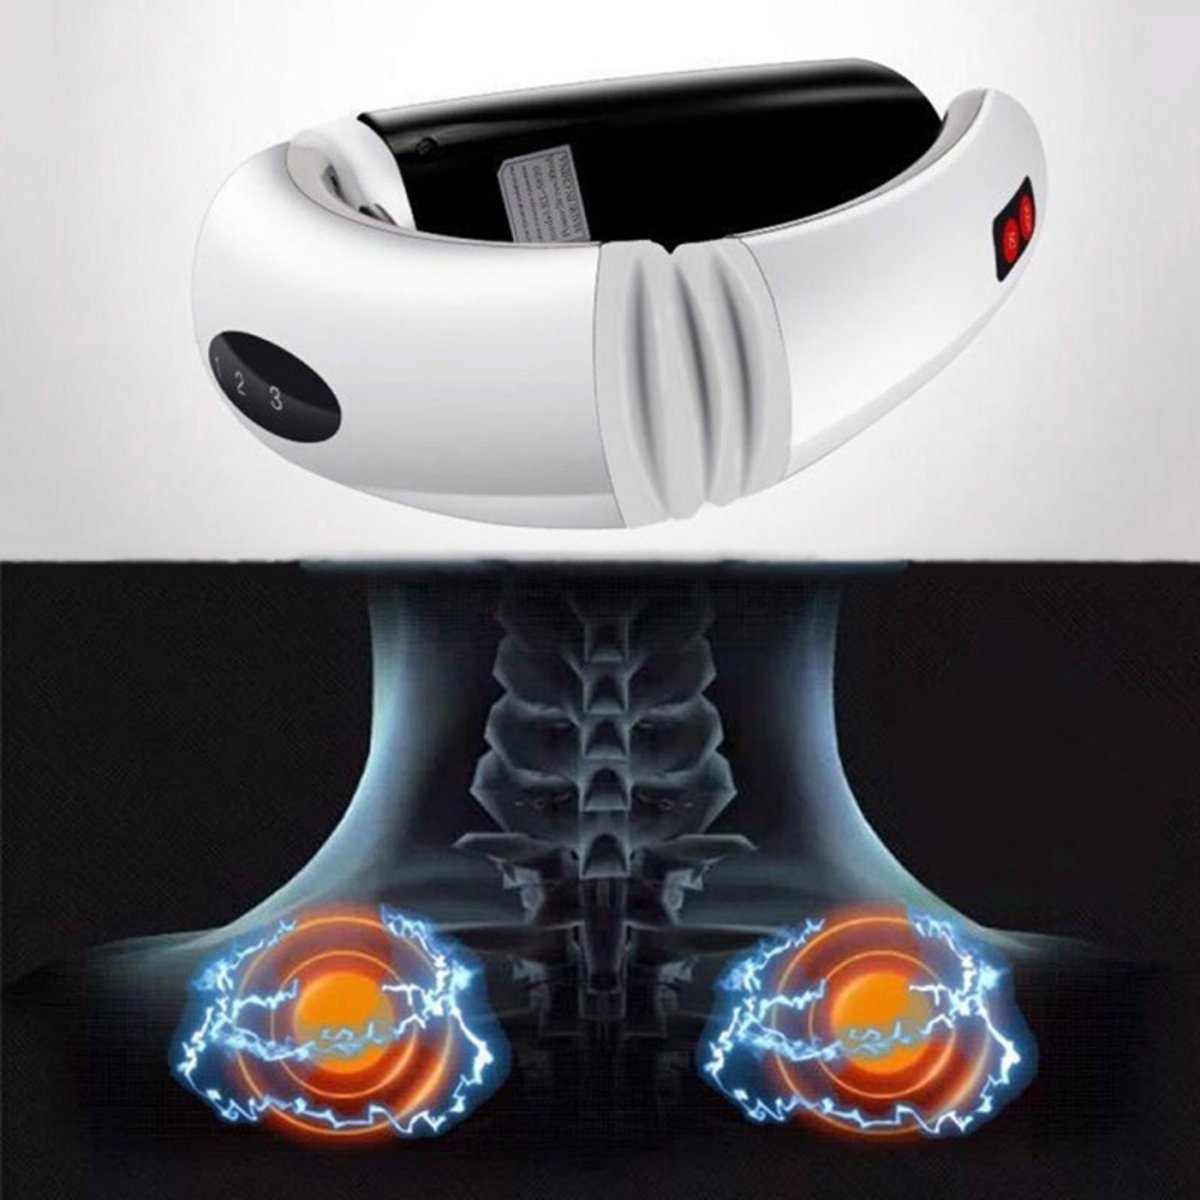 Hot-Electric-Cervical-Neck-Support--Massager-Body-Shoulder-Relax-Massage-Magnetic-Therapy-1352605-2